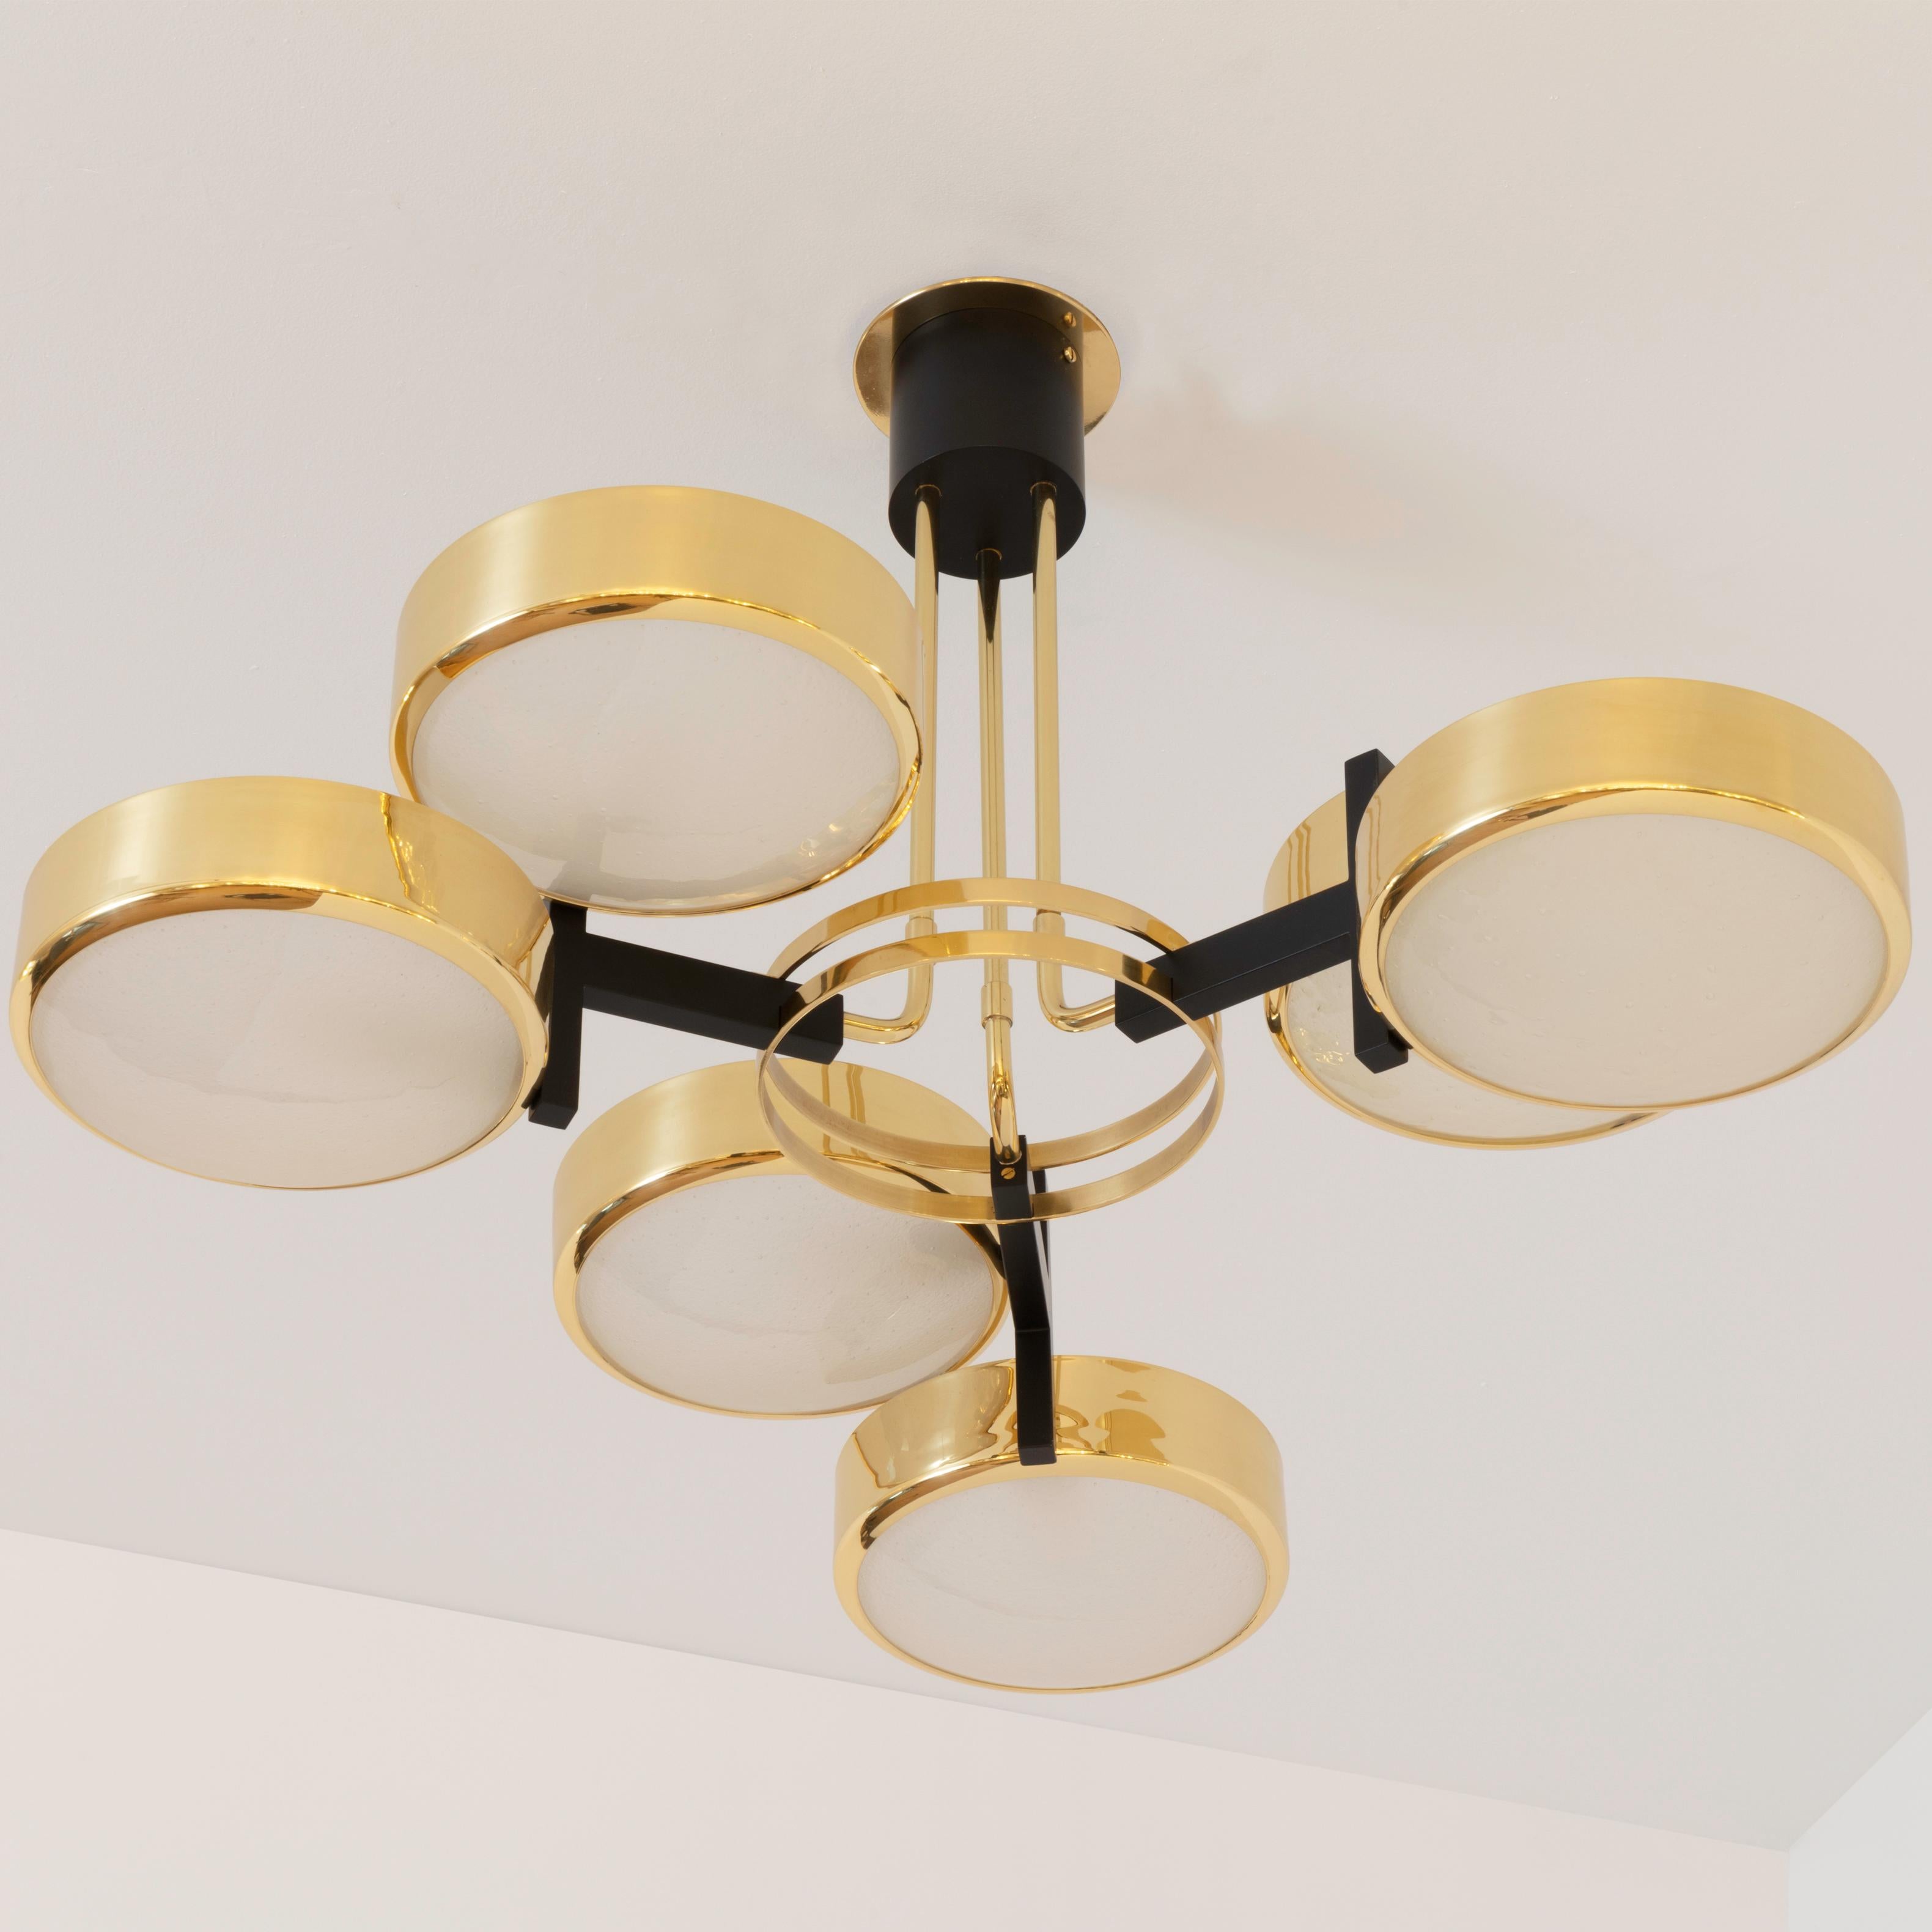 Italian Eclissi Ceiling Light by Gaspare Asaro- Satin Brass and Satin Nickel Finish For Sale